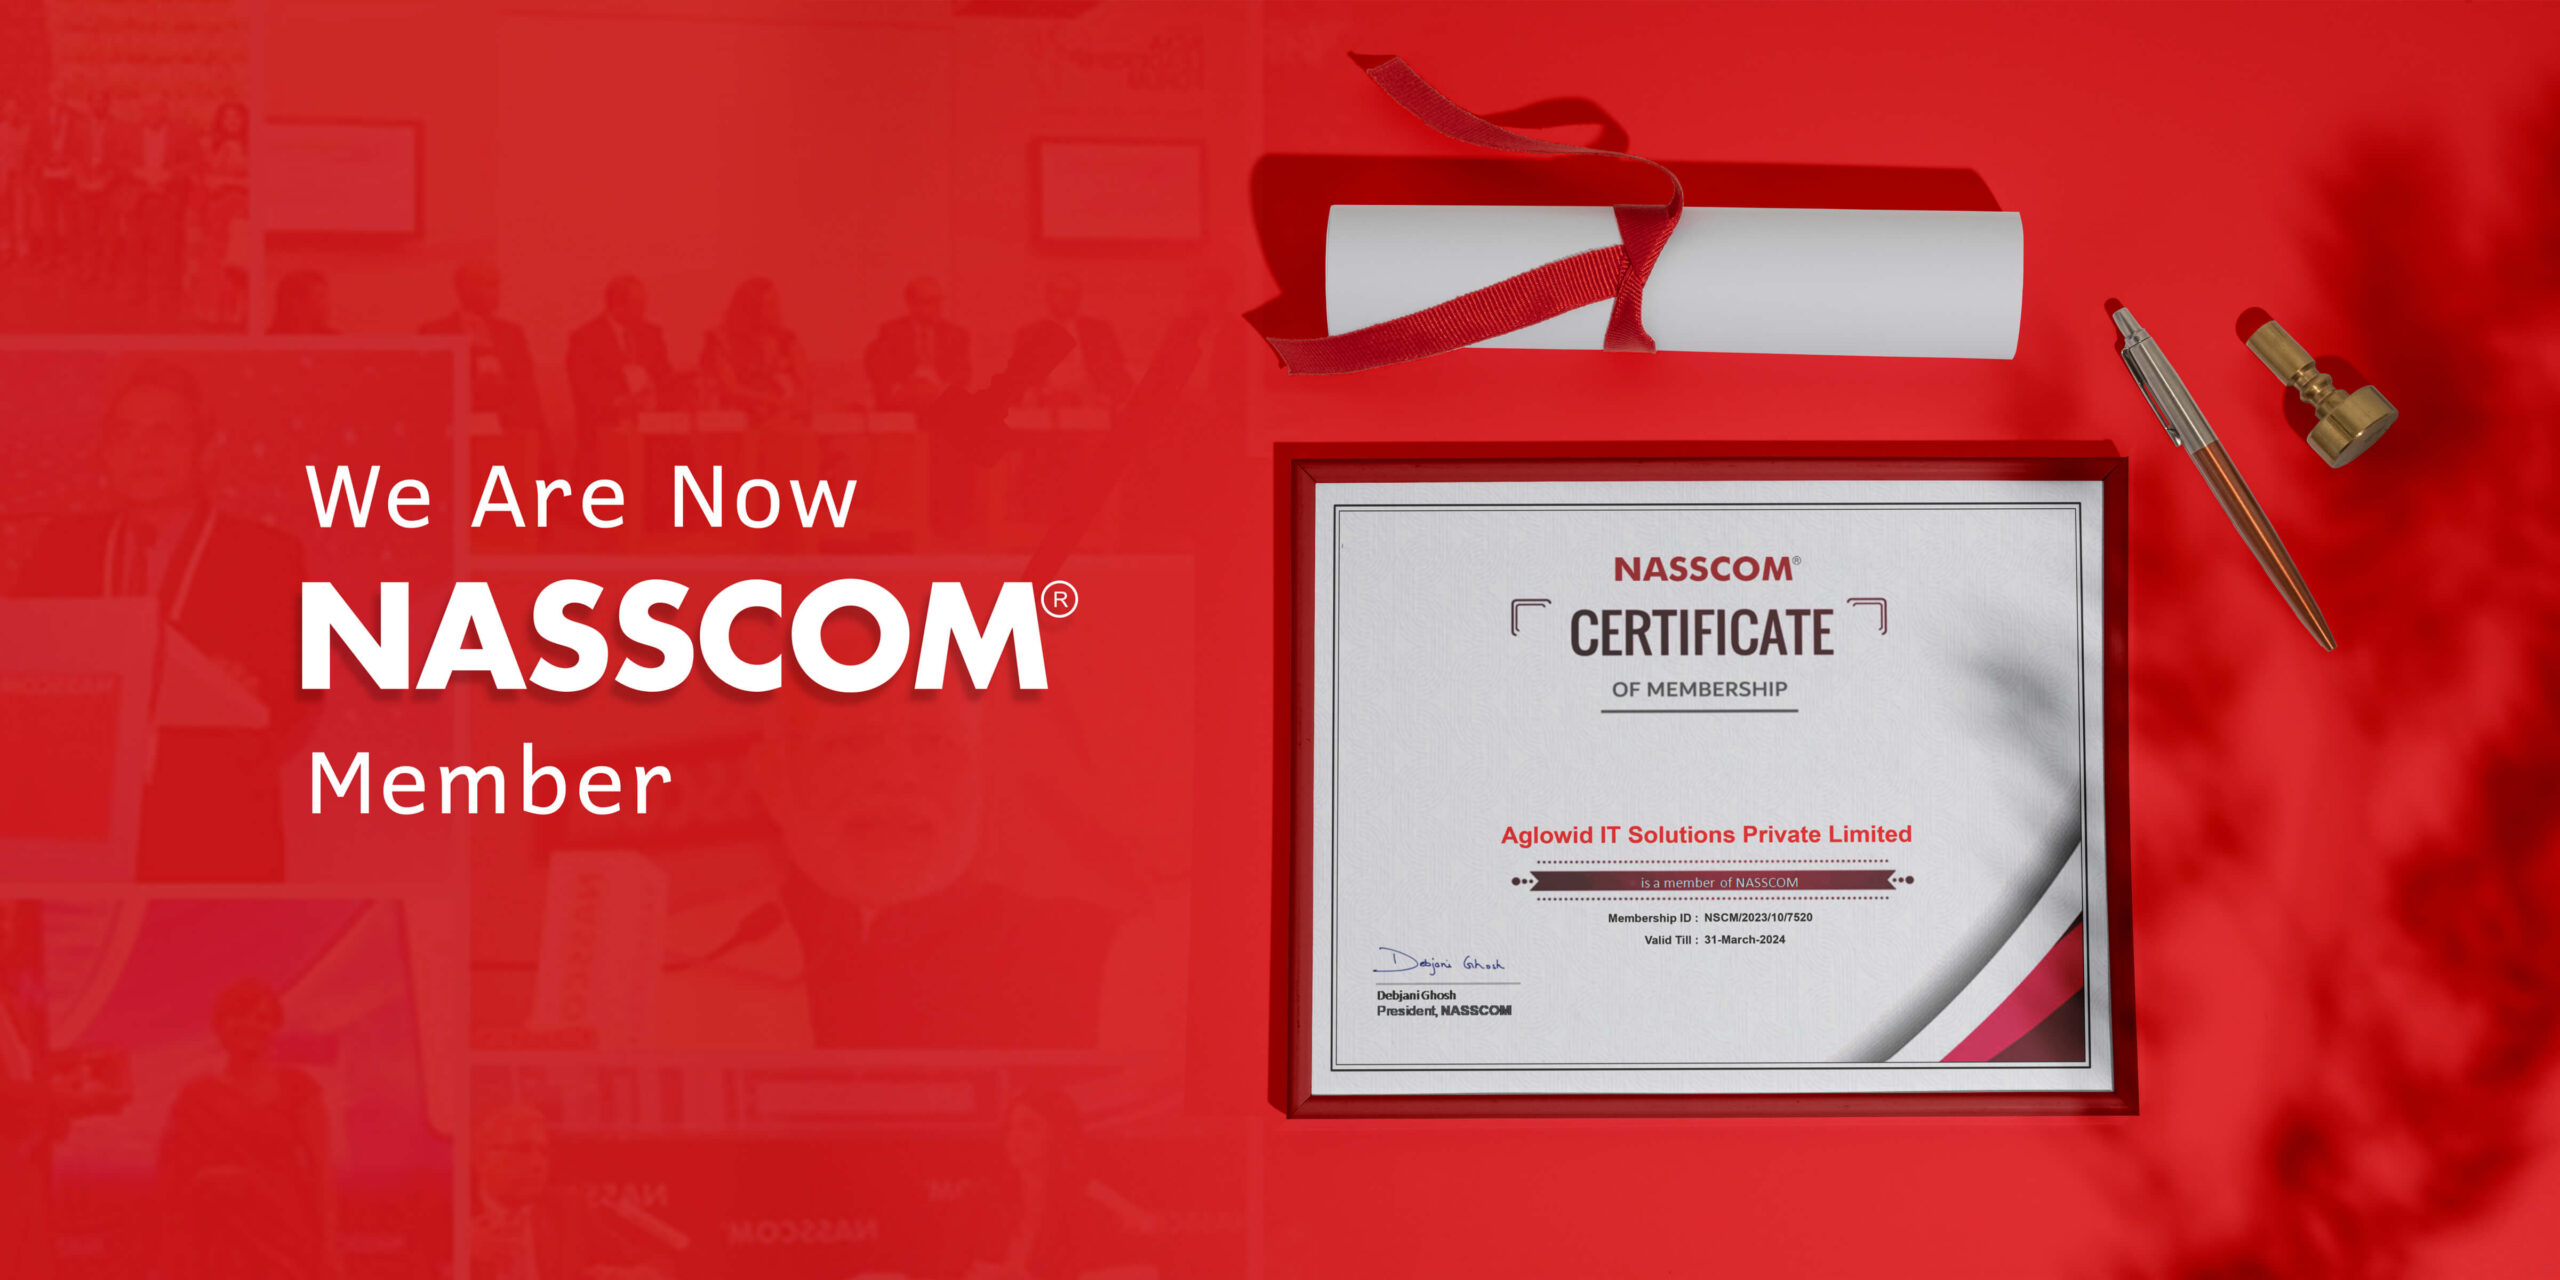 Aglowid IT Solutions – an established IT company in India – is now an NASSCOM Certified Member